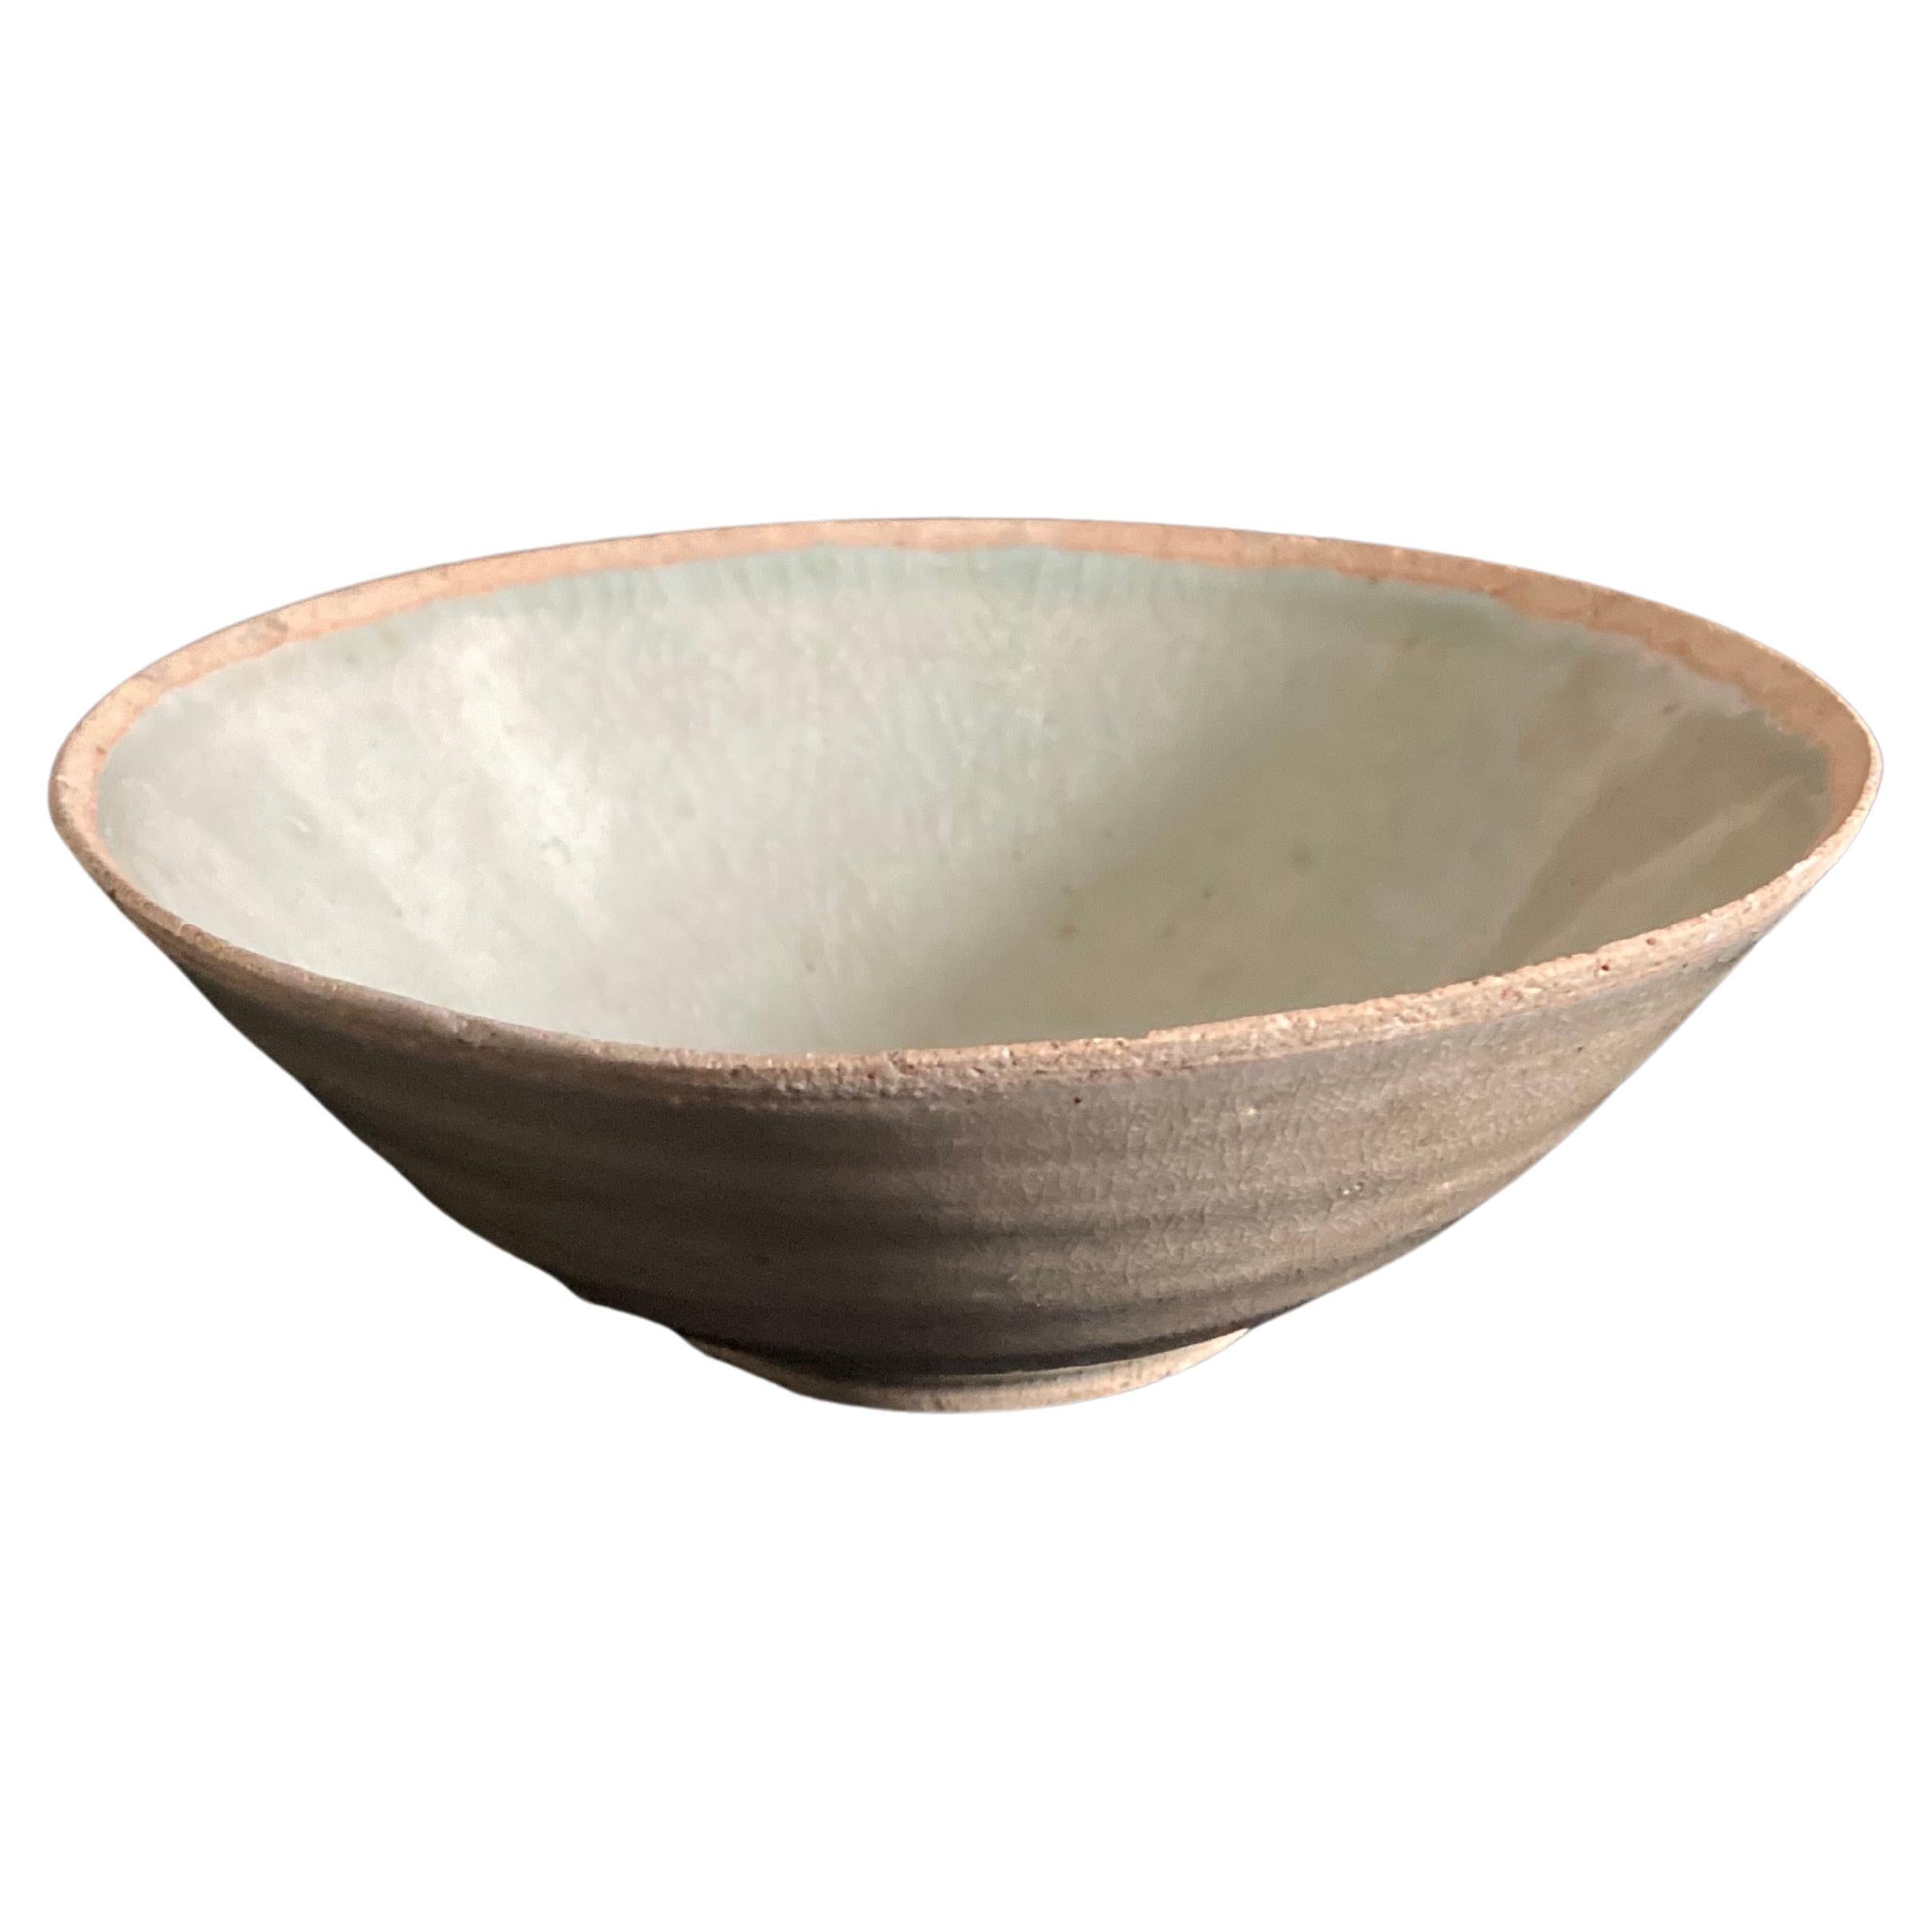 Chinese Song Period Celadon Glazed Bowl